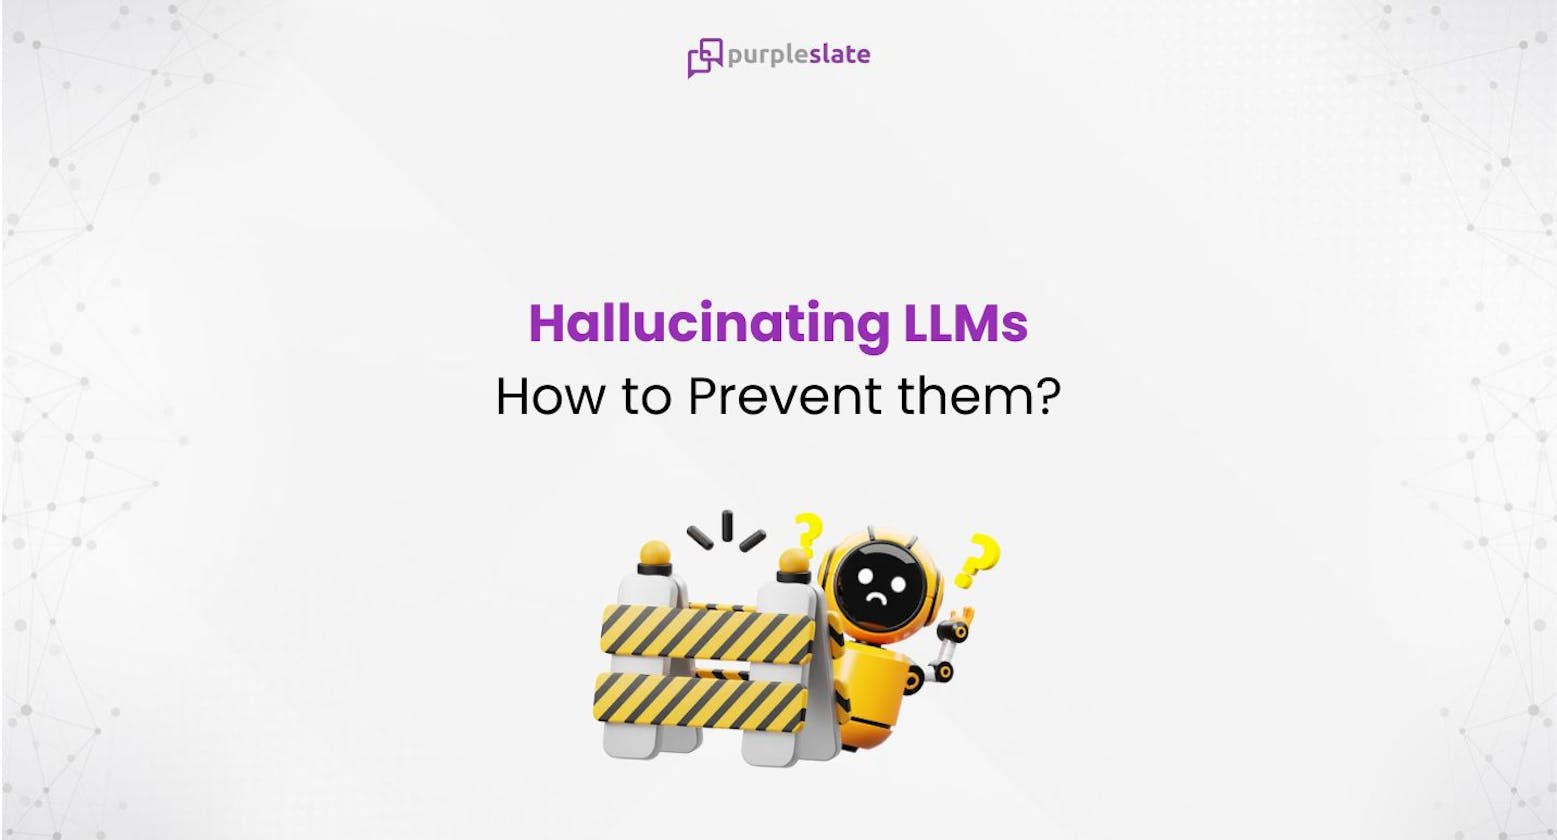 Hallucinating LLMs — How to Prevent them?